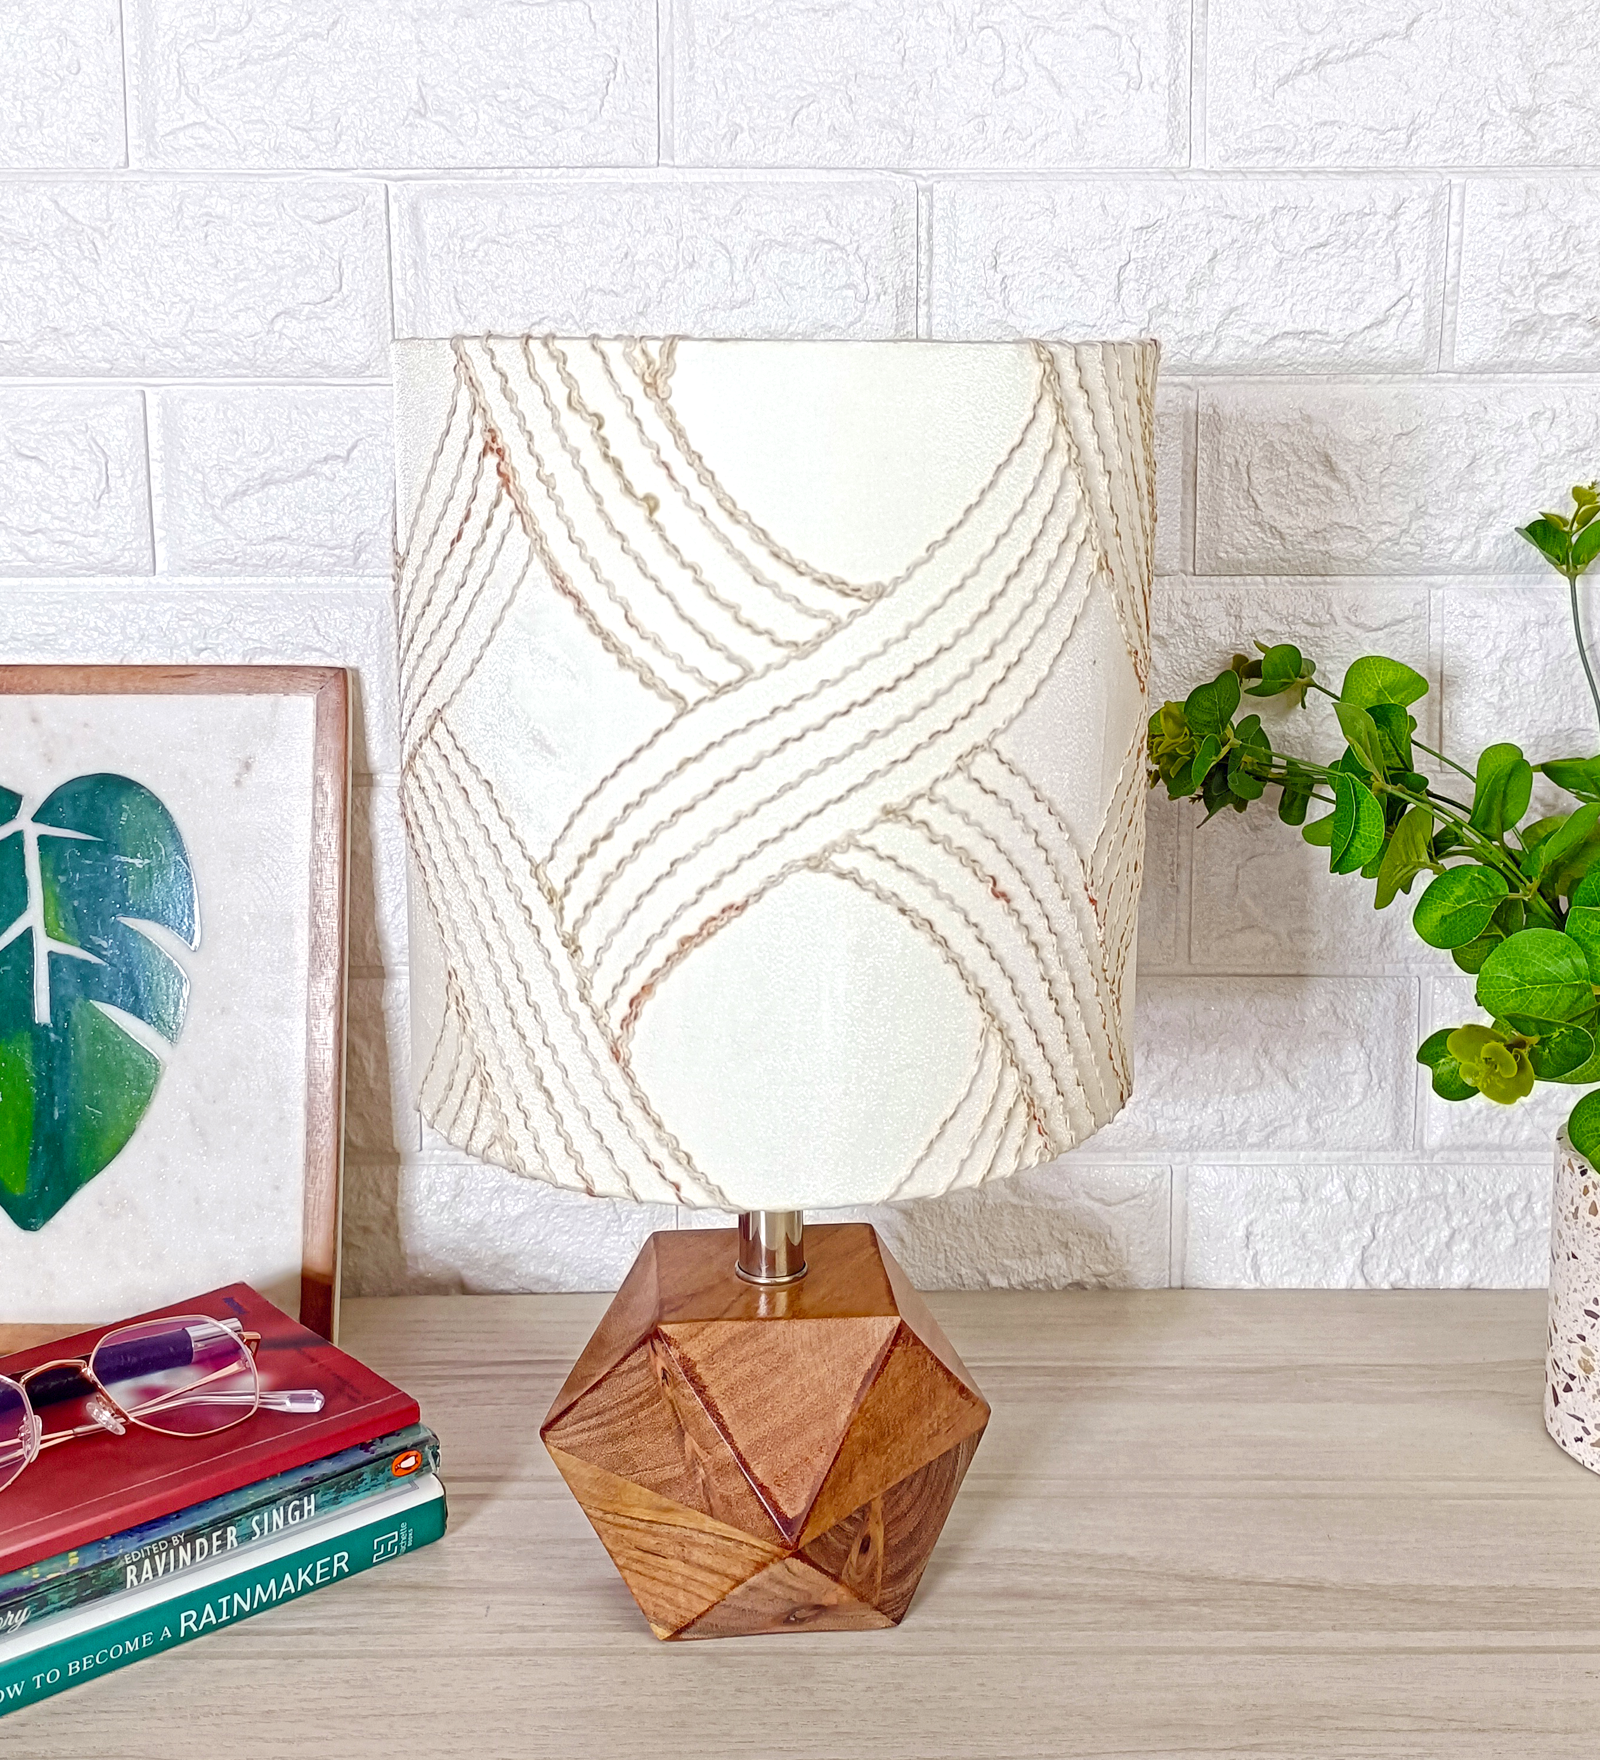 Exquisite Wooden table lamp